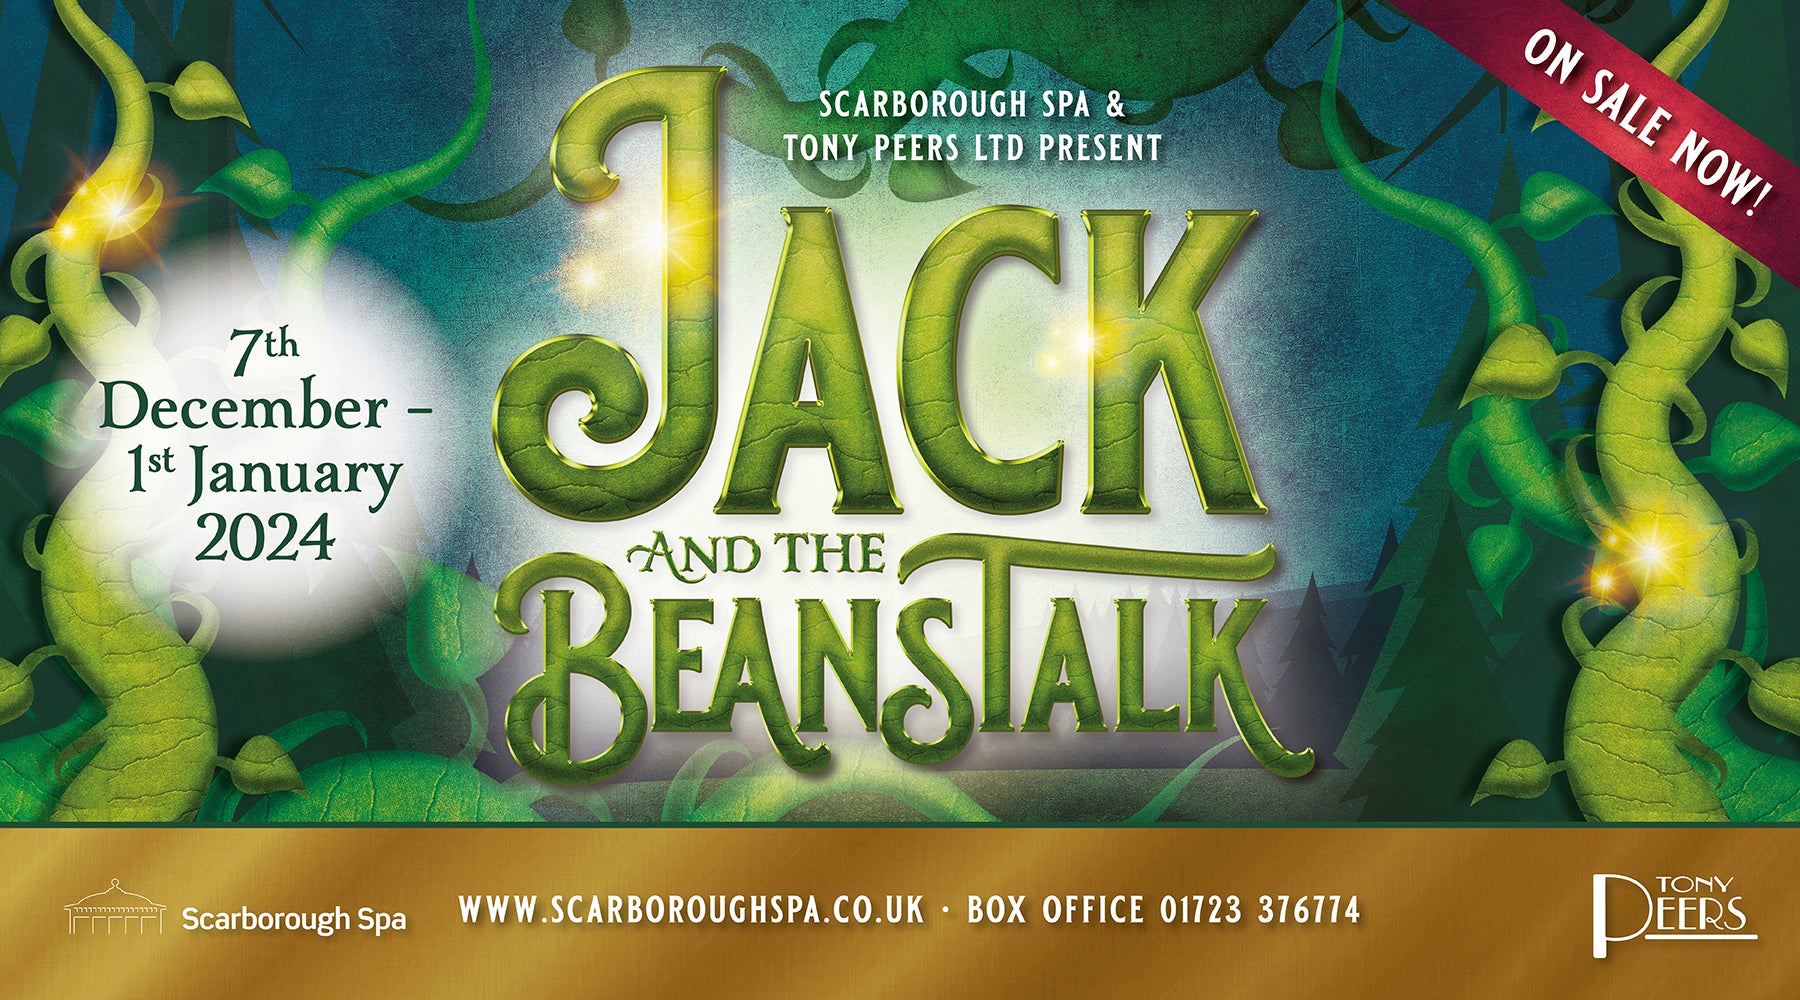 Image name Jack and the Beanstalk at Scarborough Spa Theatre Scarborough the 26 image from the post Jack and the Beanstalk at Scarborough Spa Theatre, Scarborough in Yorkshire.com.